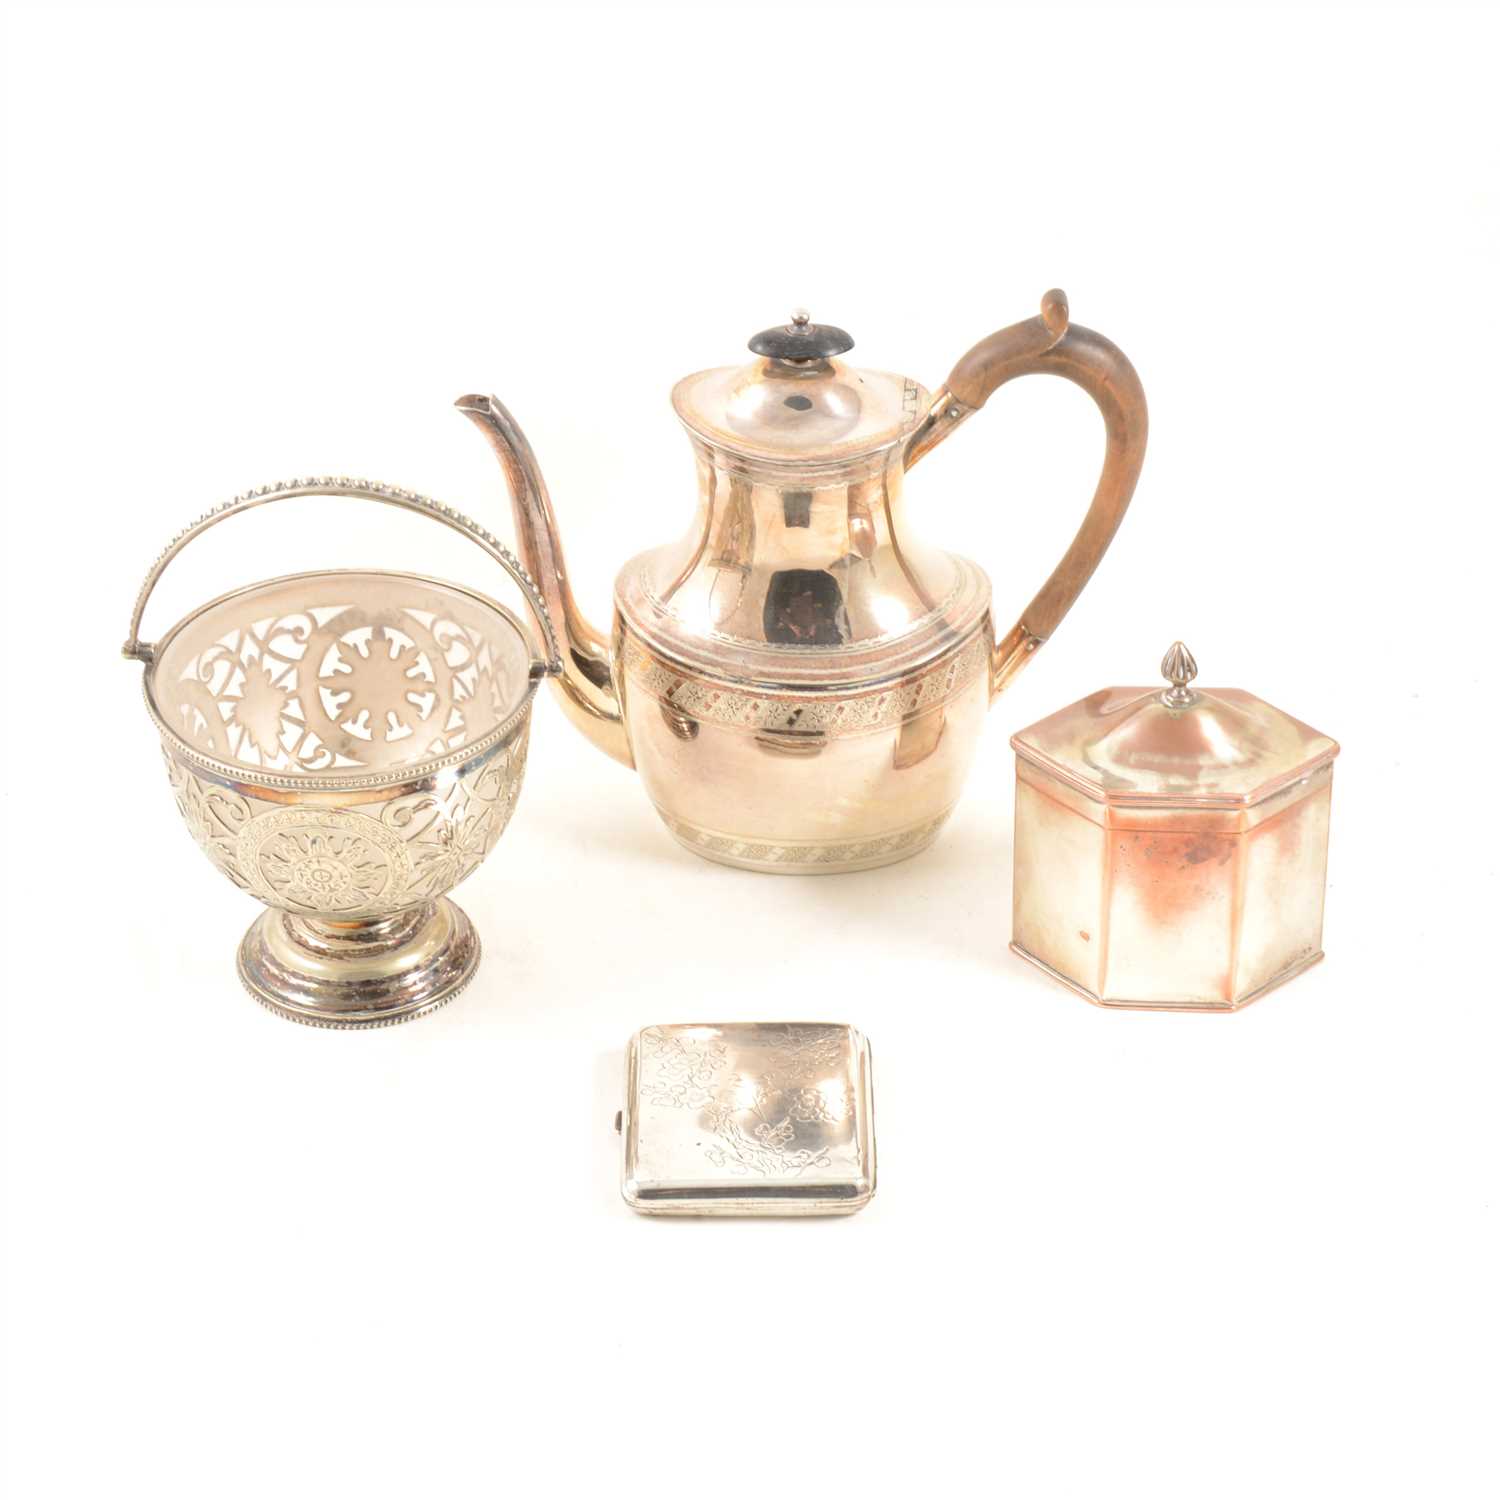 Lot 107 - Collection of electroplated ware, including a tea caddy of hexagonal section, ...